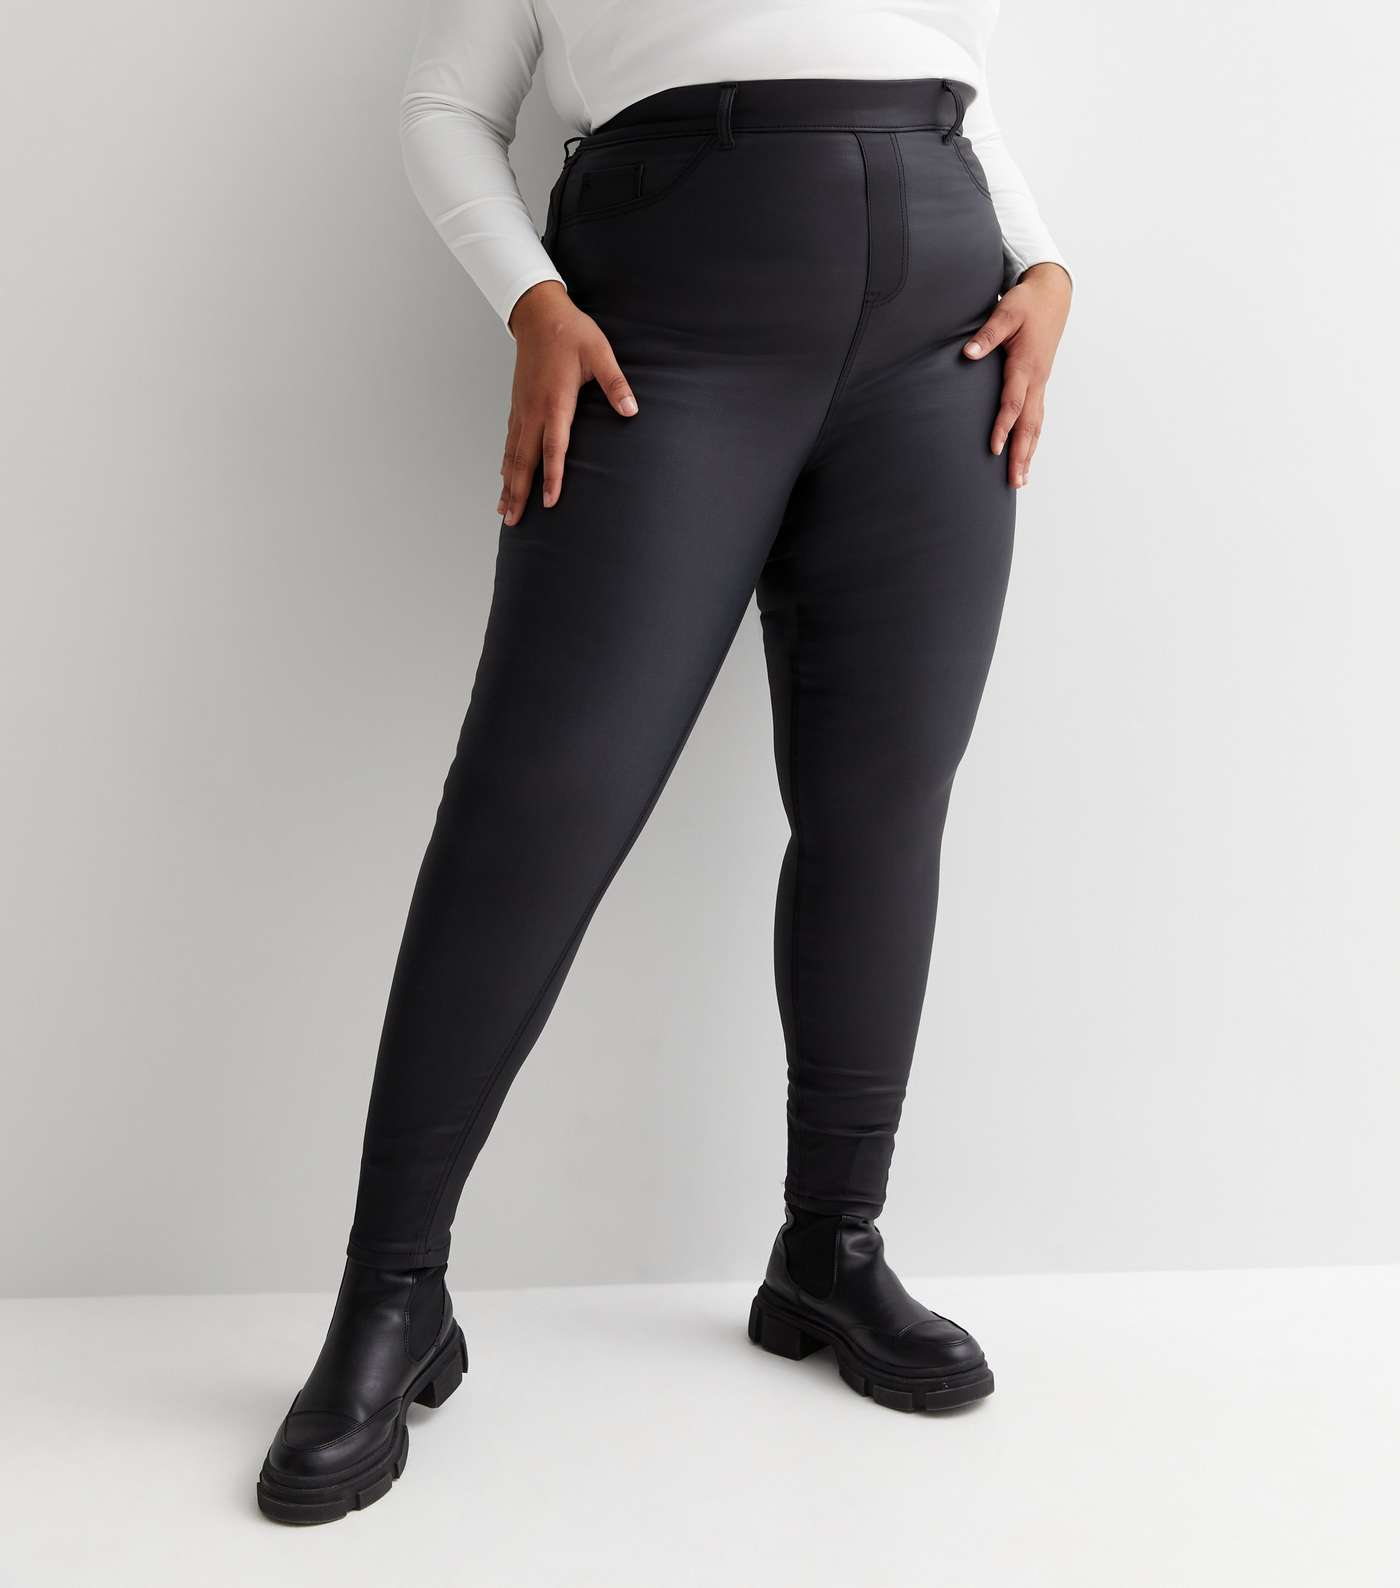 Curves Black Coated Leather-Look High Waist Jeggings Image 2